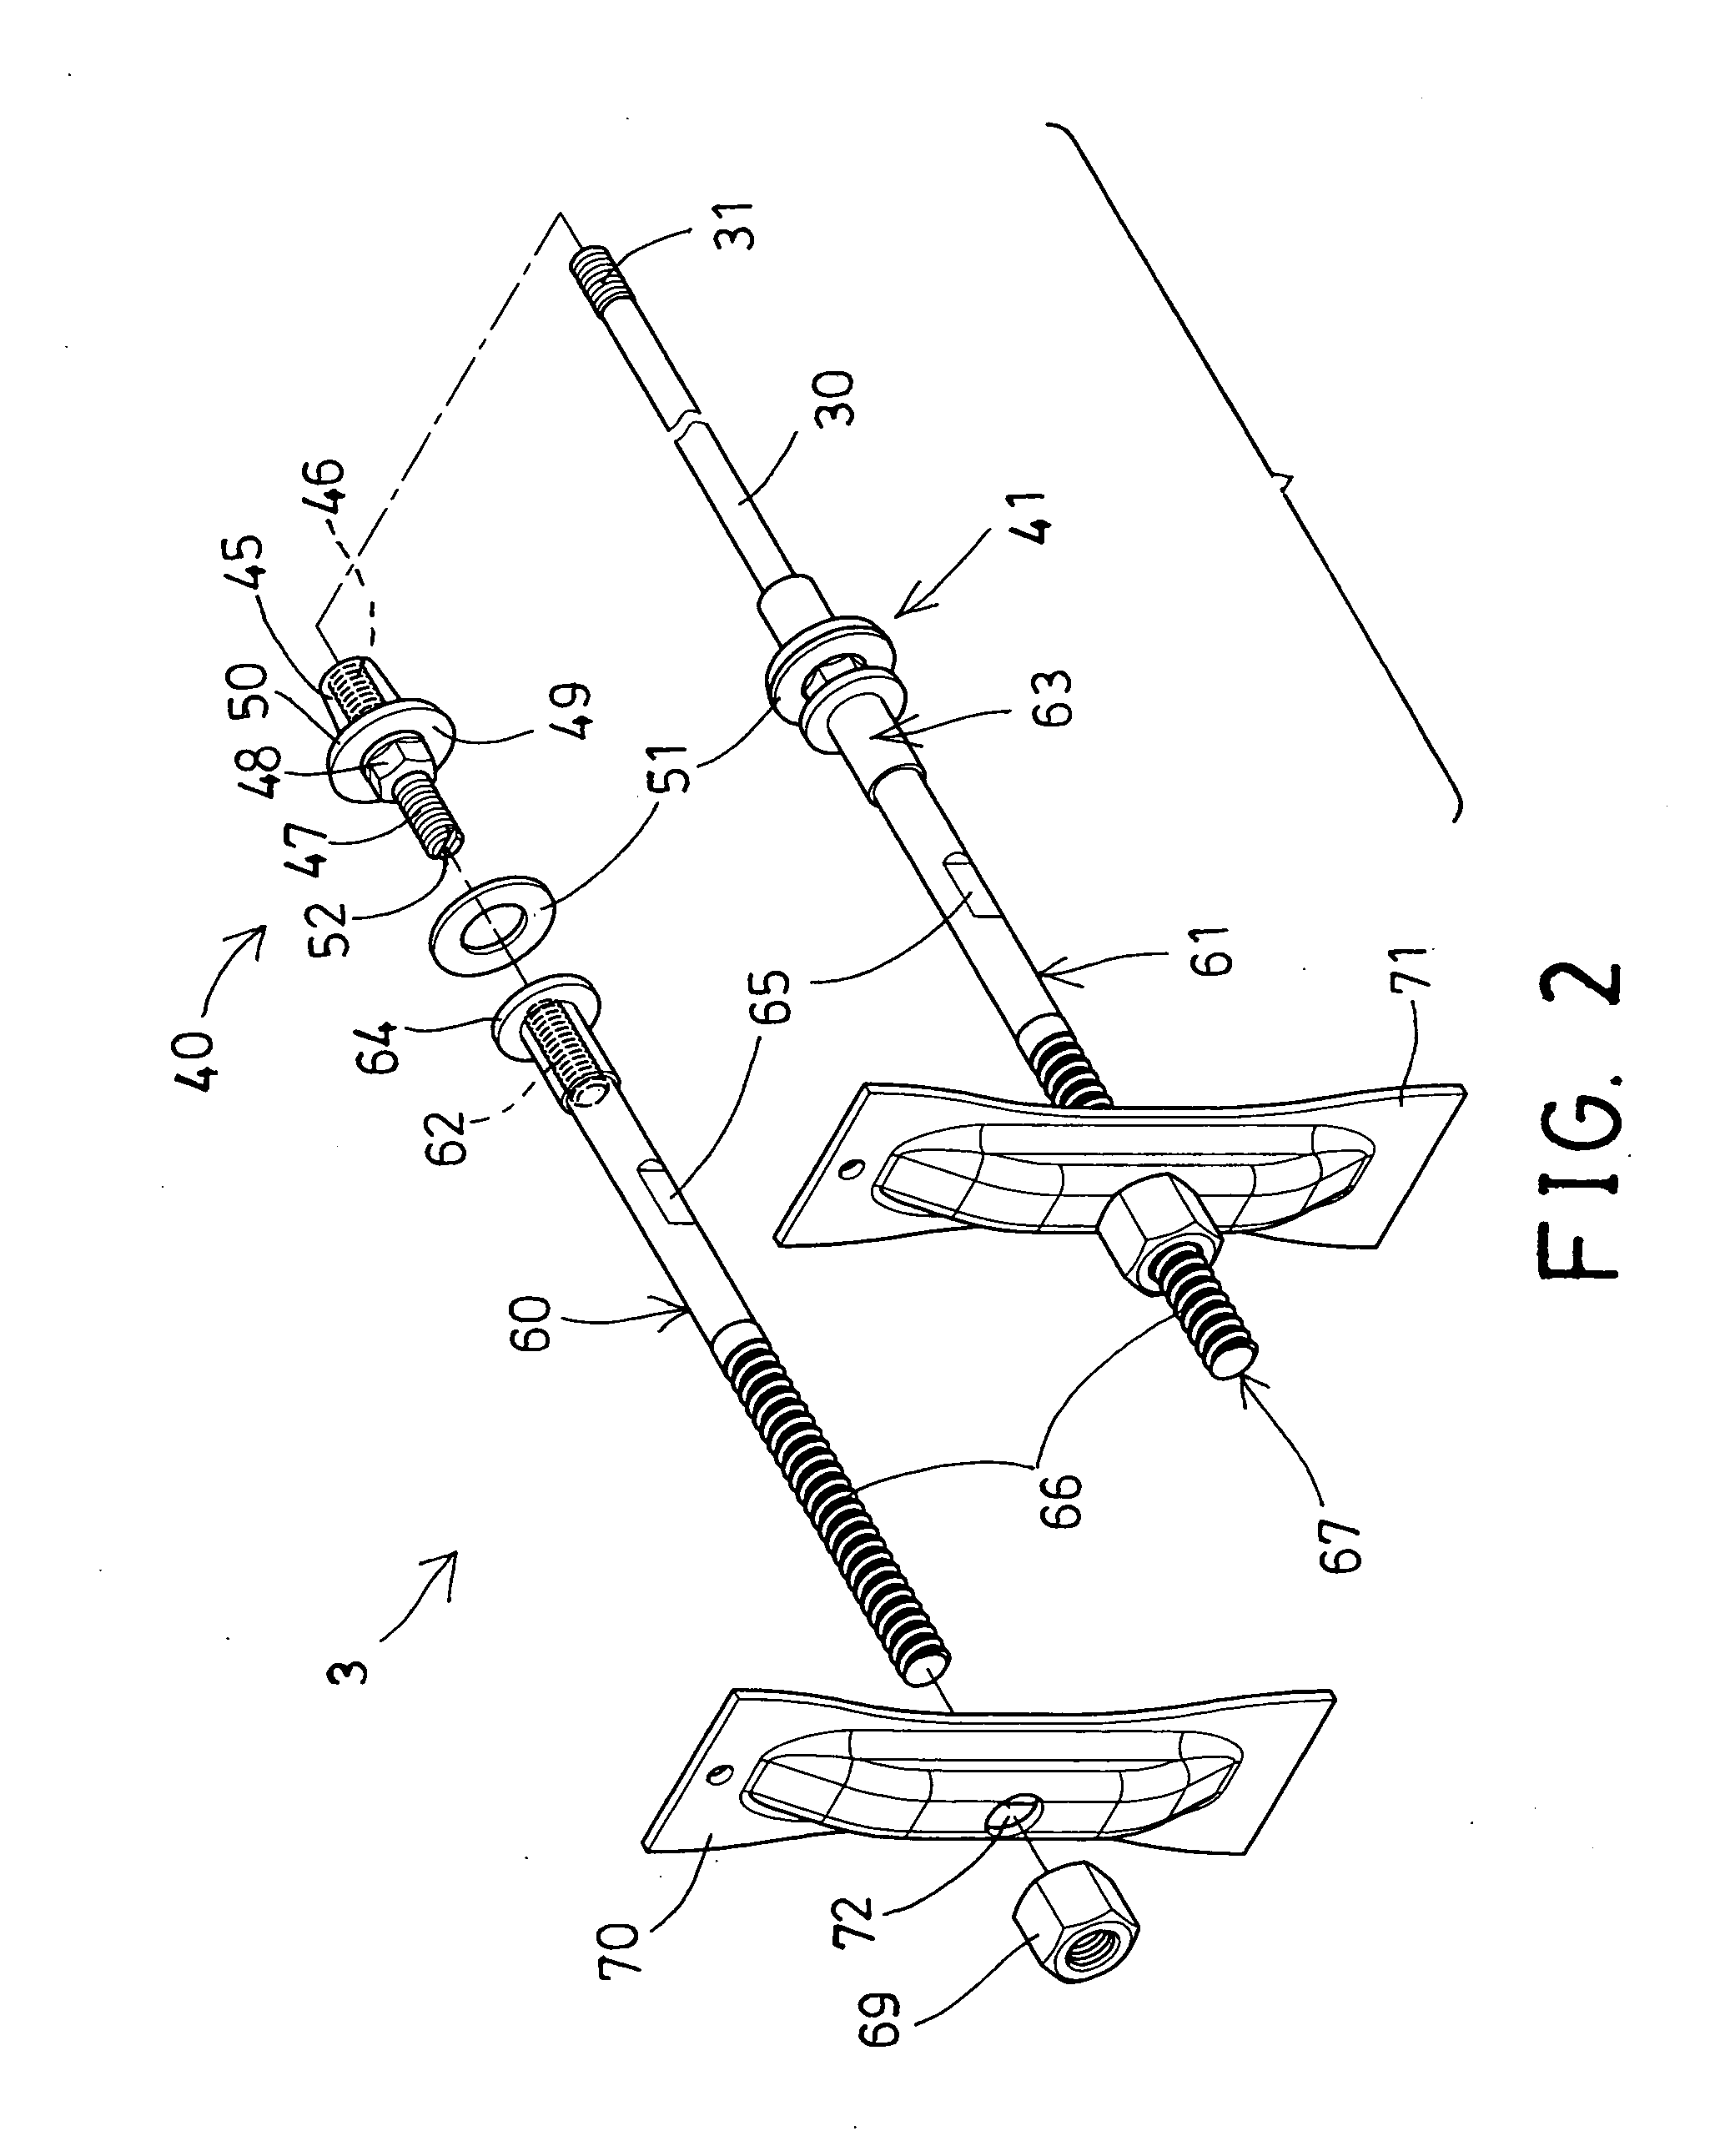 Fastener device for wall construction